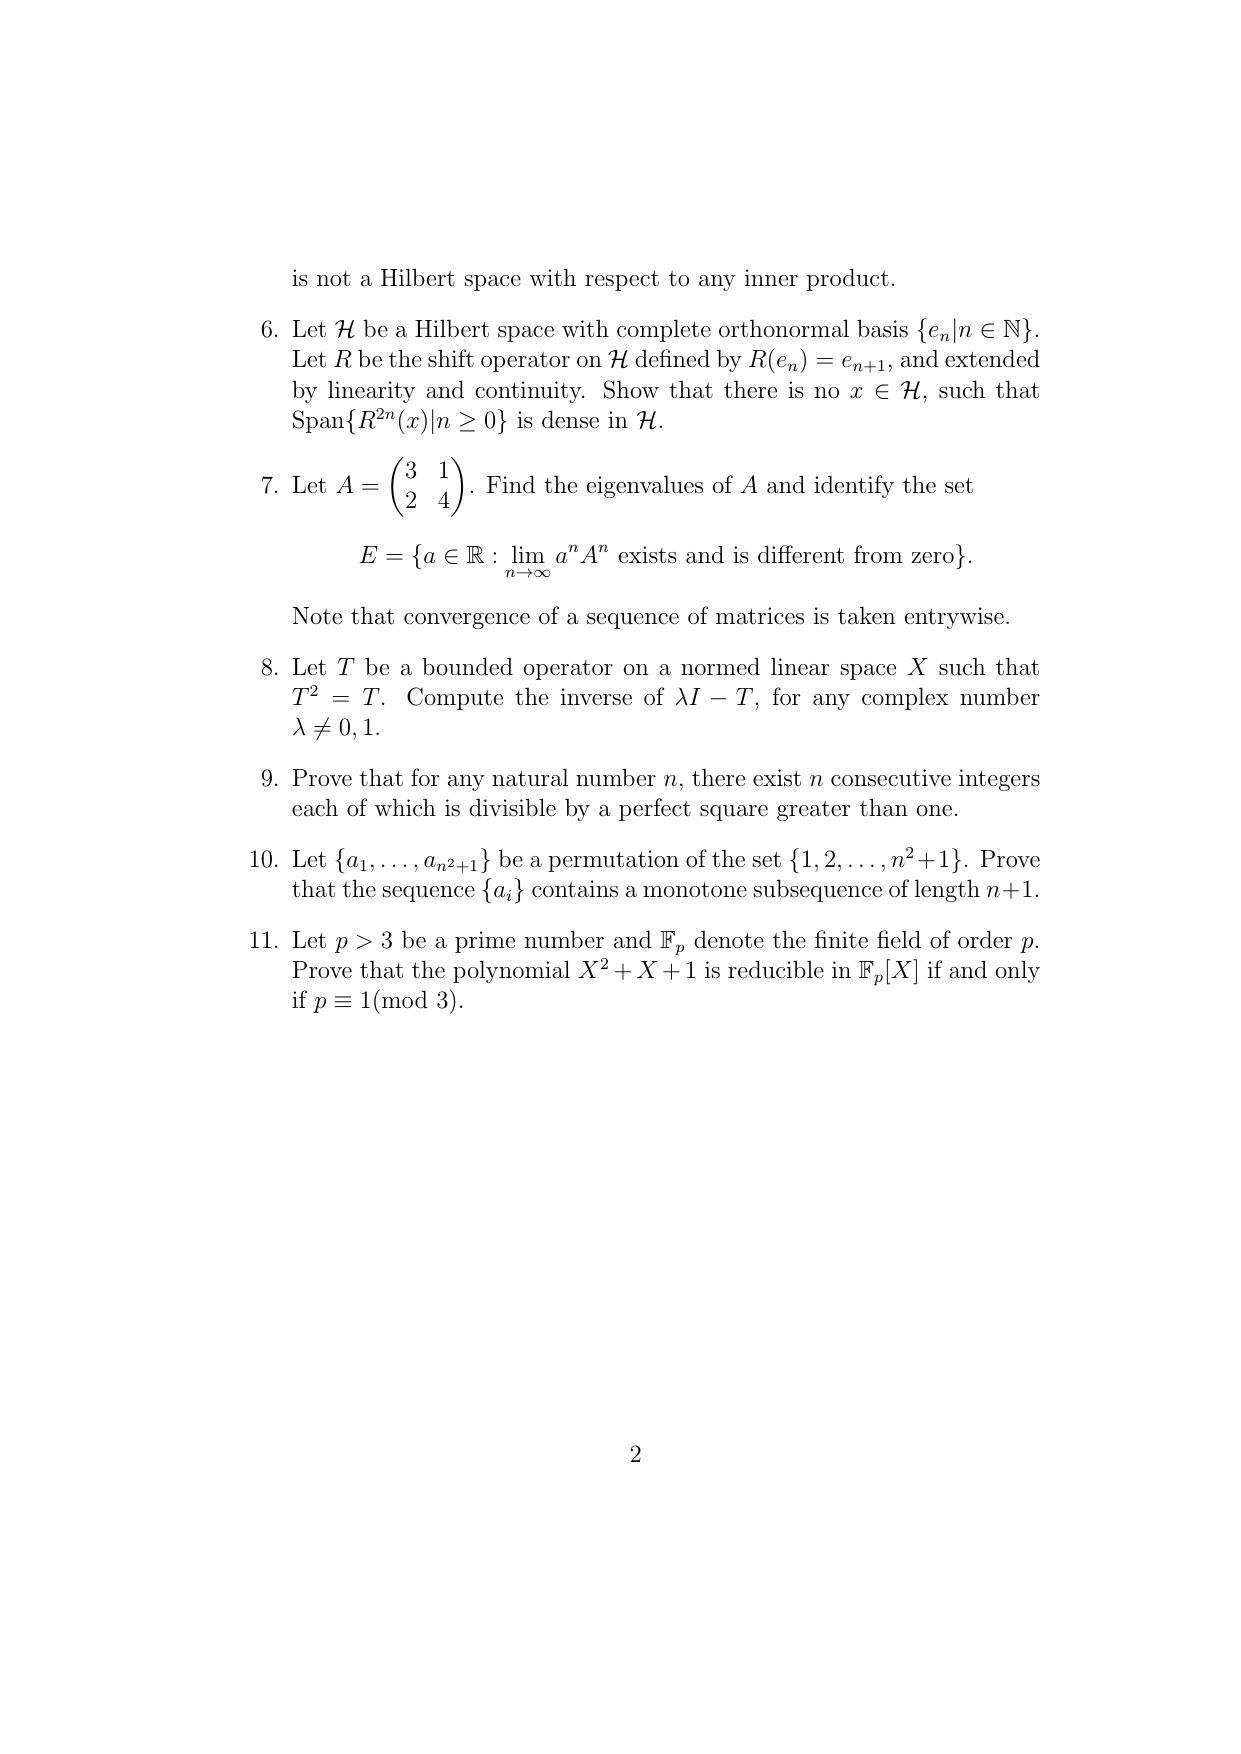 ISI Admission Test JRF in Mathematics MTB 2016 Sample Paper - Page 2